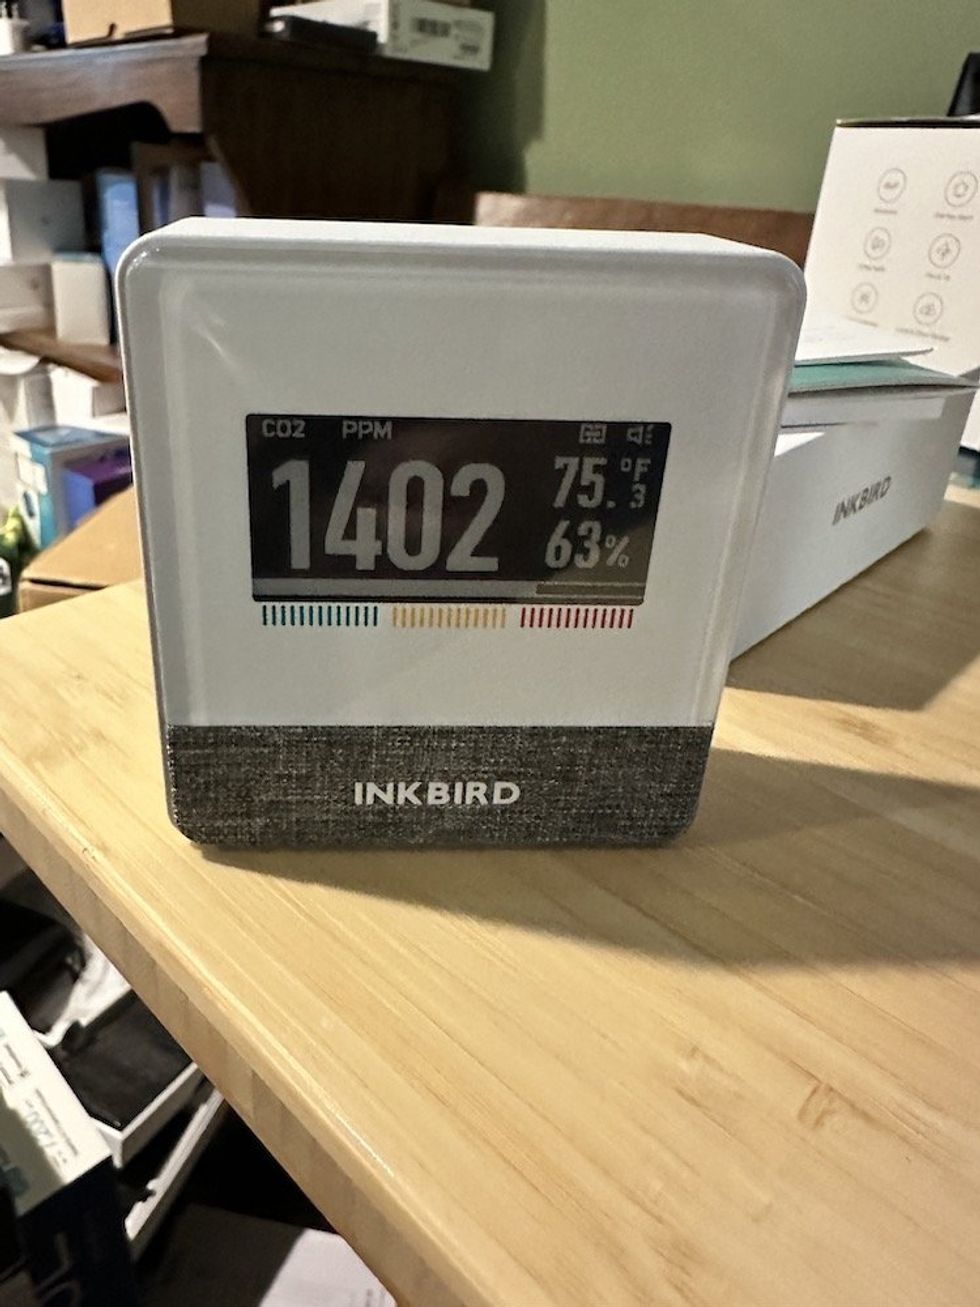 INKBIRD monitor showing the color lines for air quality